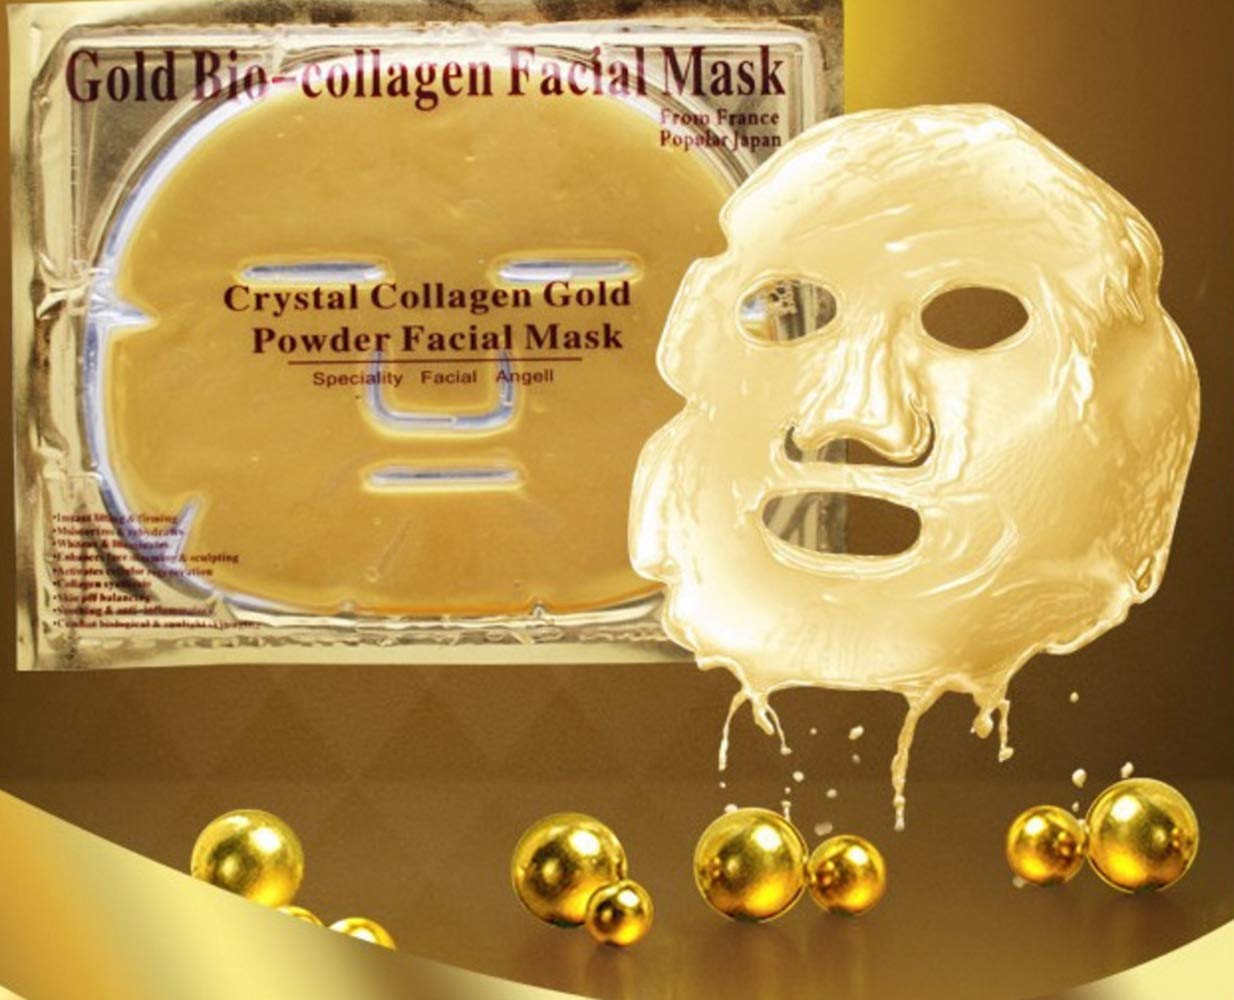 AICHUN BEAUTY 5PCS 24K Gold Gel Collagen Crystal Facial Masks Sheet Patch For Anti Aging, Puffiness, Anti Wrinkle, Moisturizing, Deep Tissue Rejuvenation and Hydrates Skin